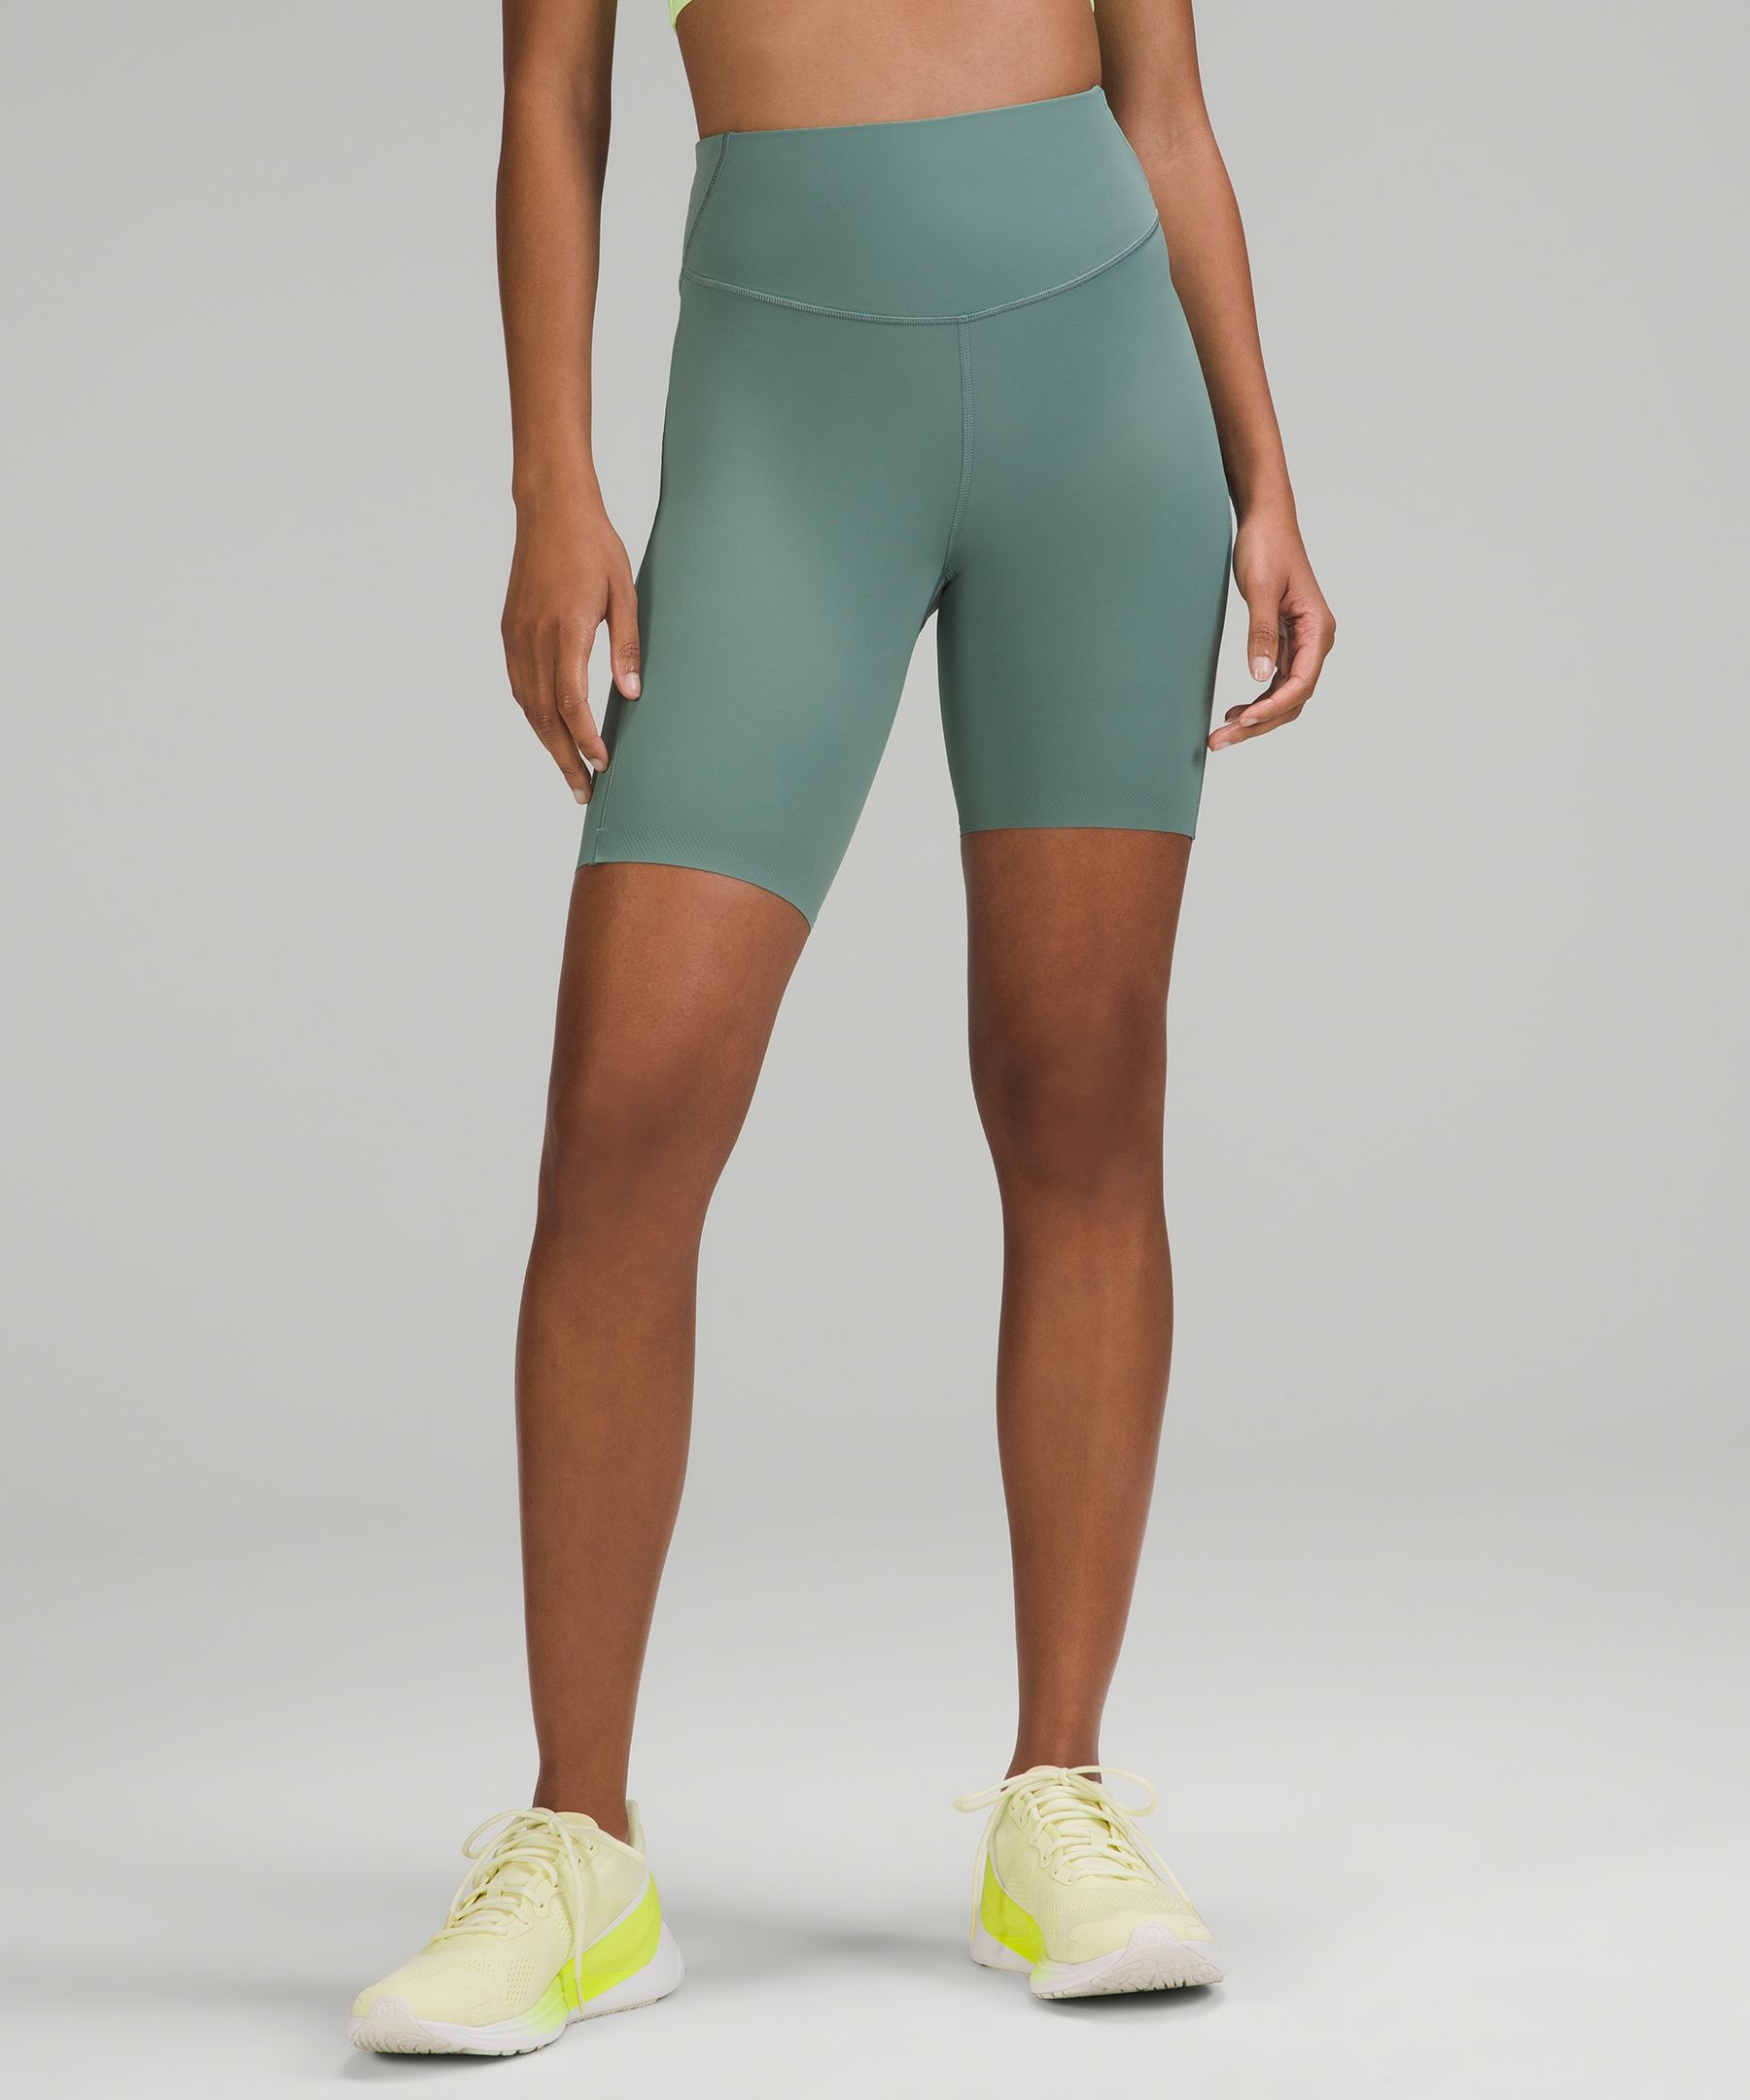 Lululemon in Style - Align Super HR 10 Shorts (review in comments